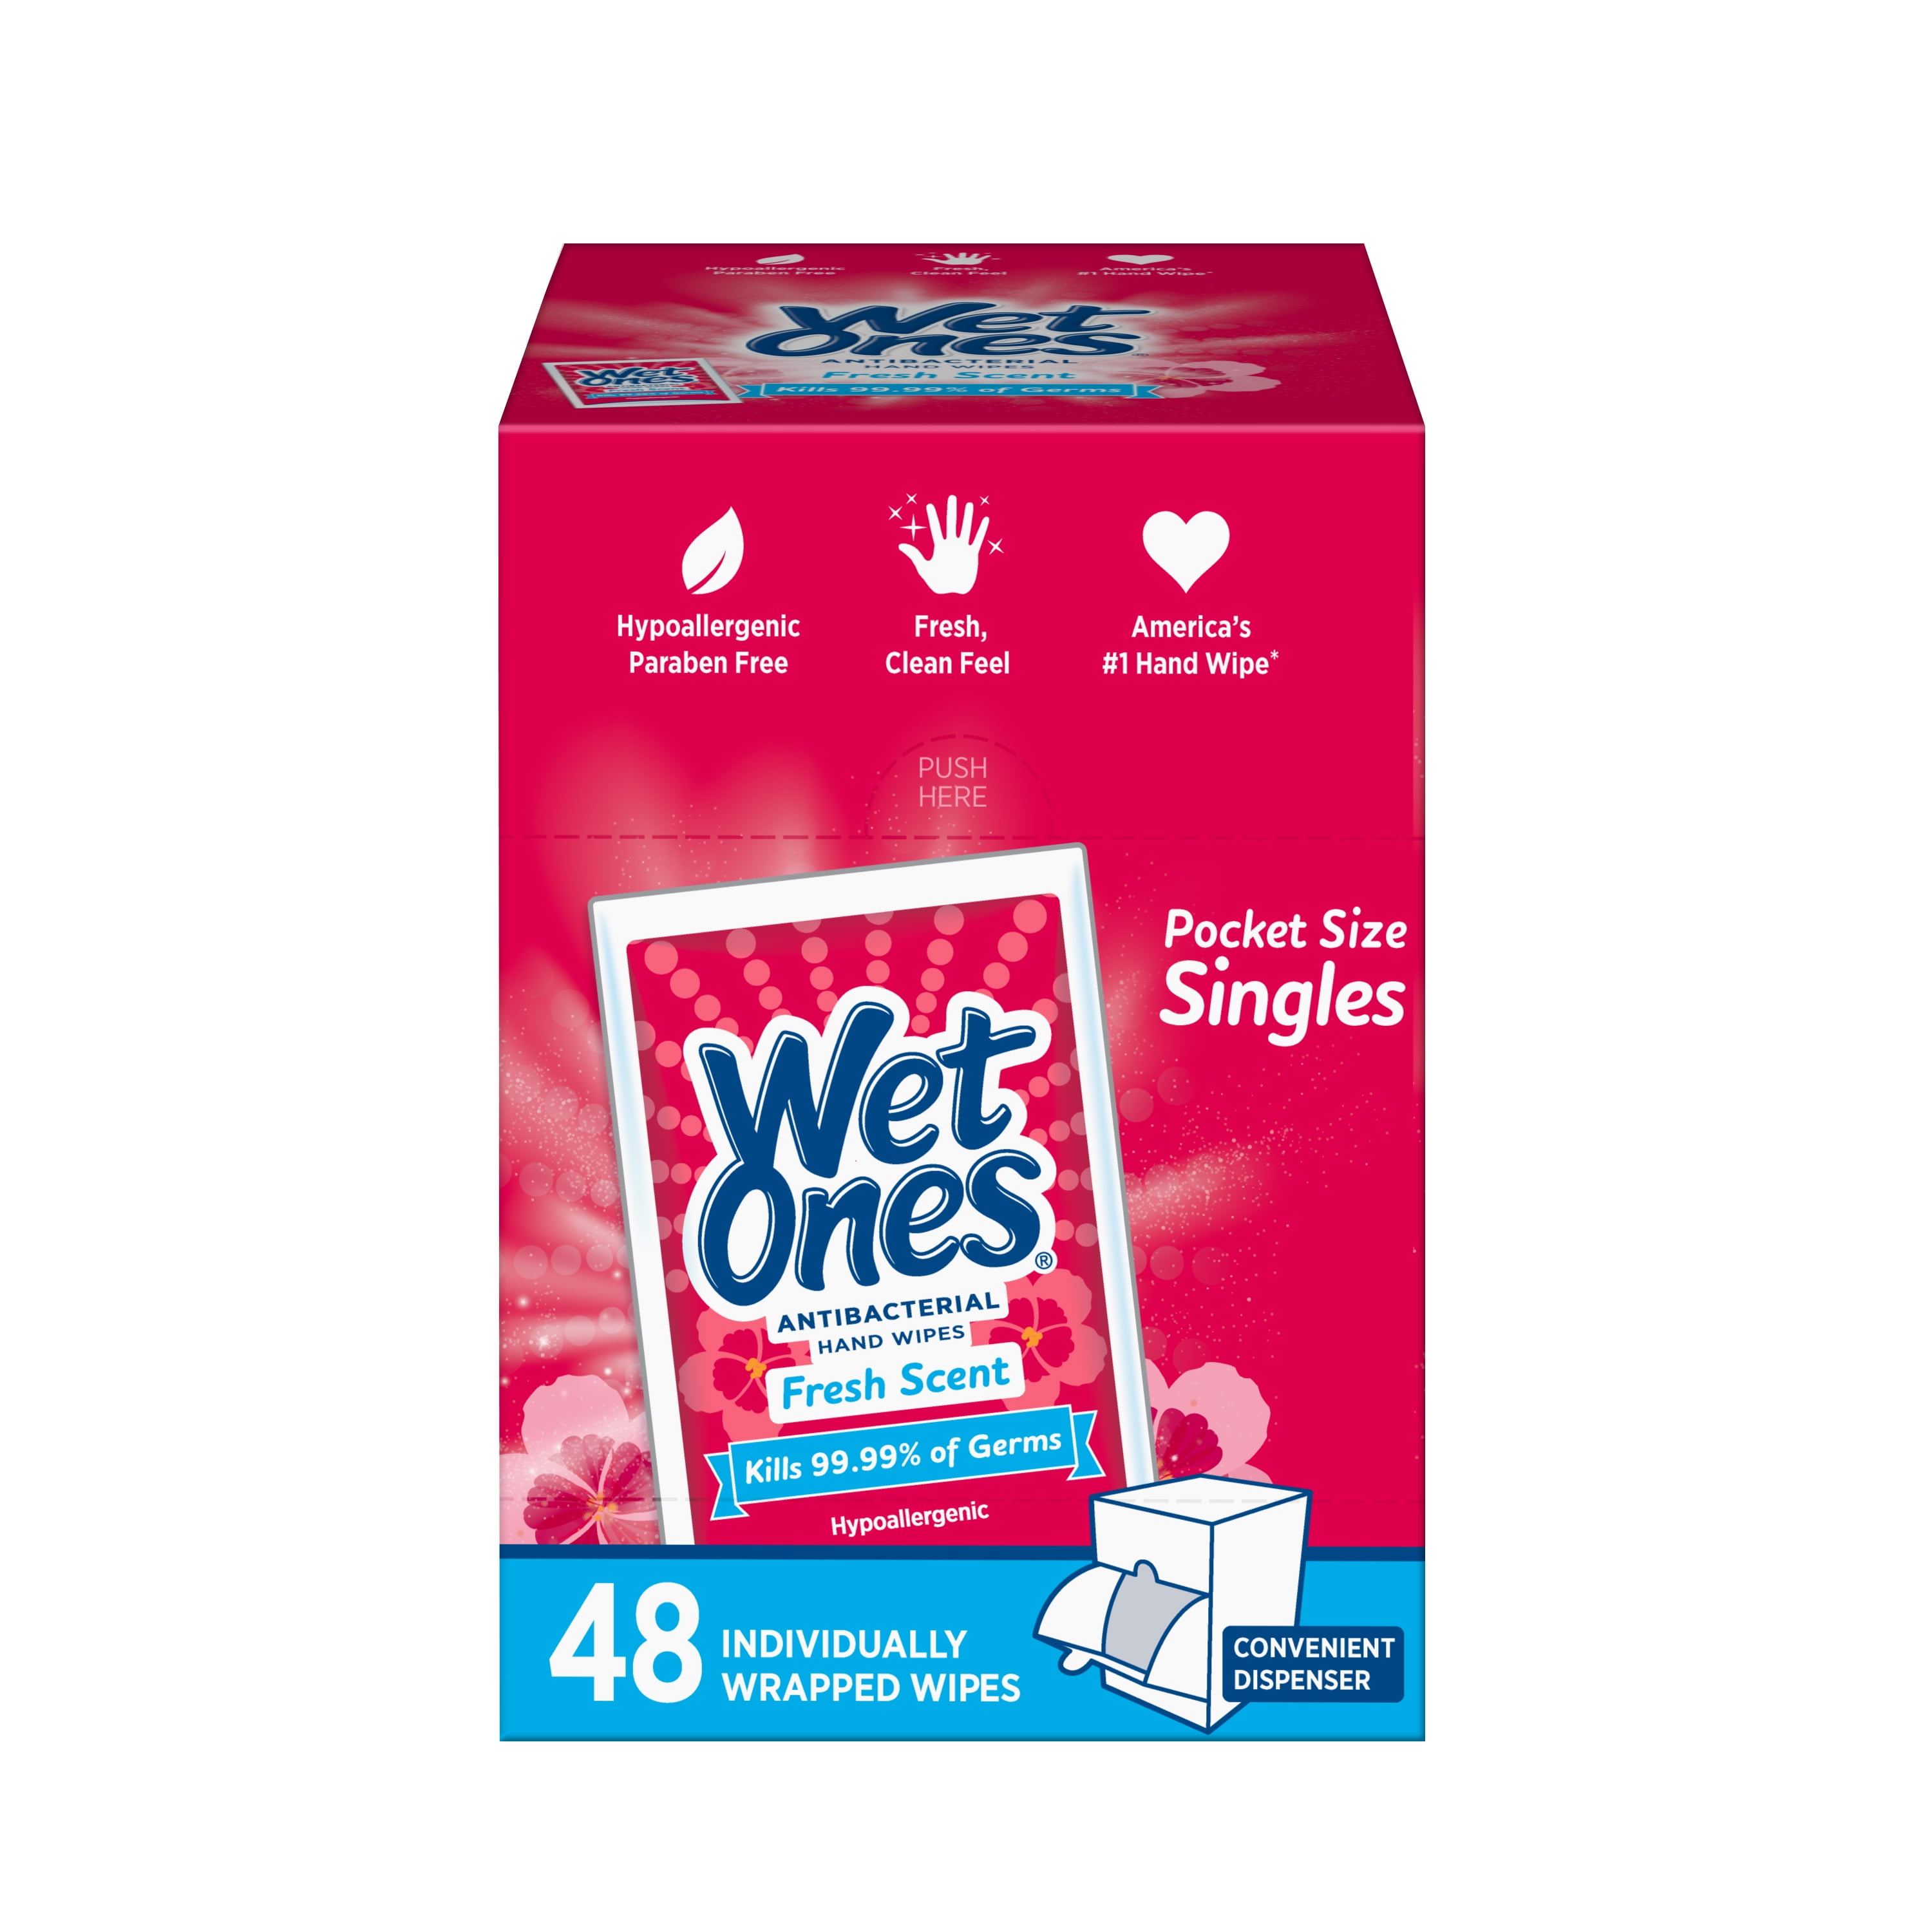 Suave Hand Cleaning Wet Wipes, 48 count